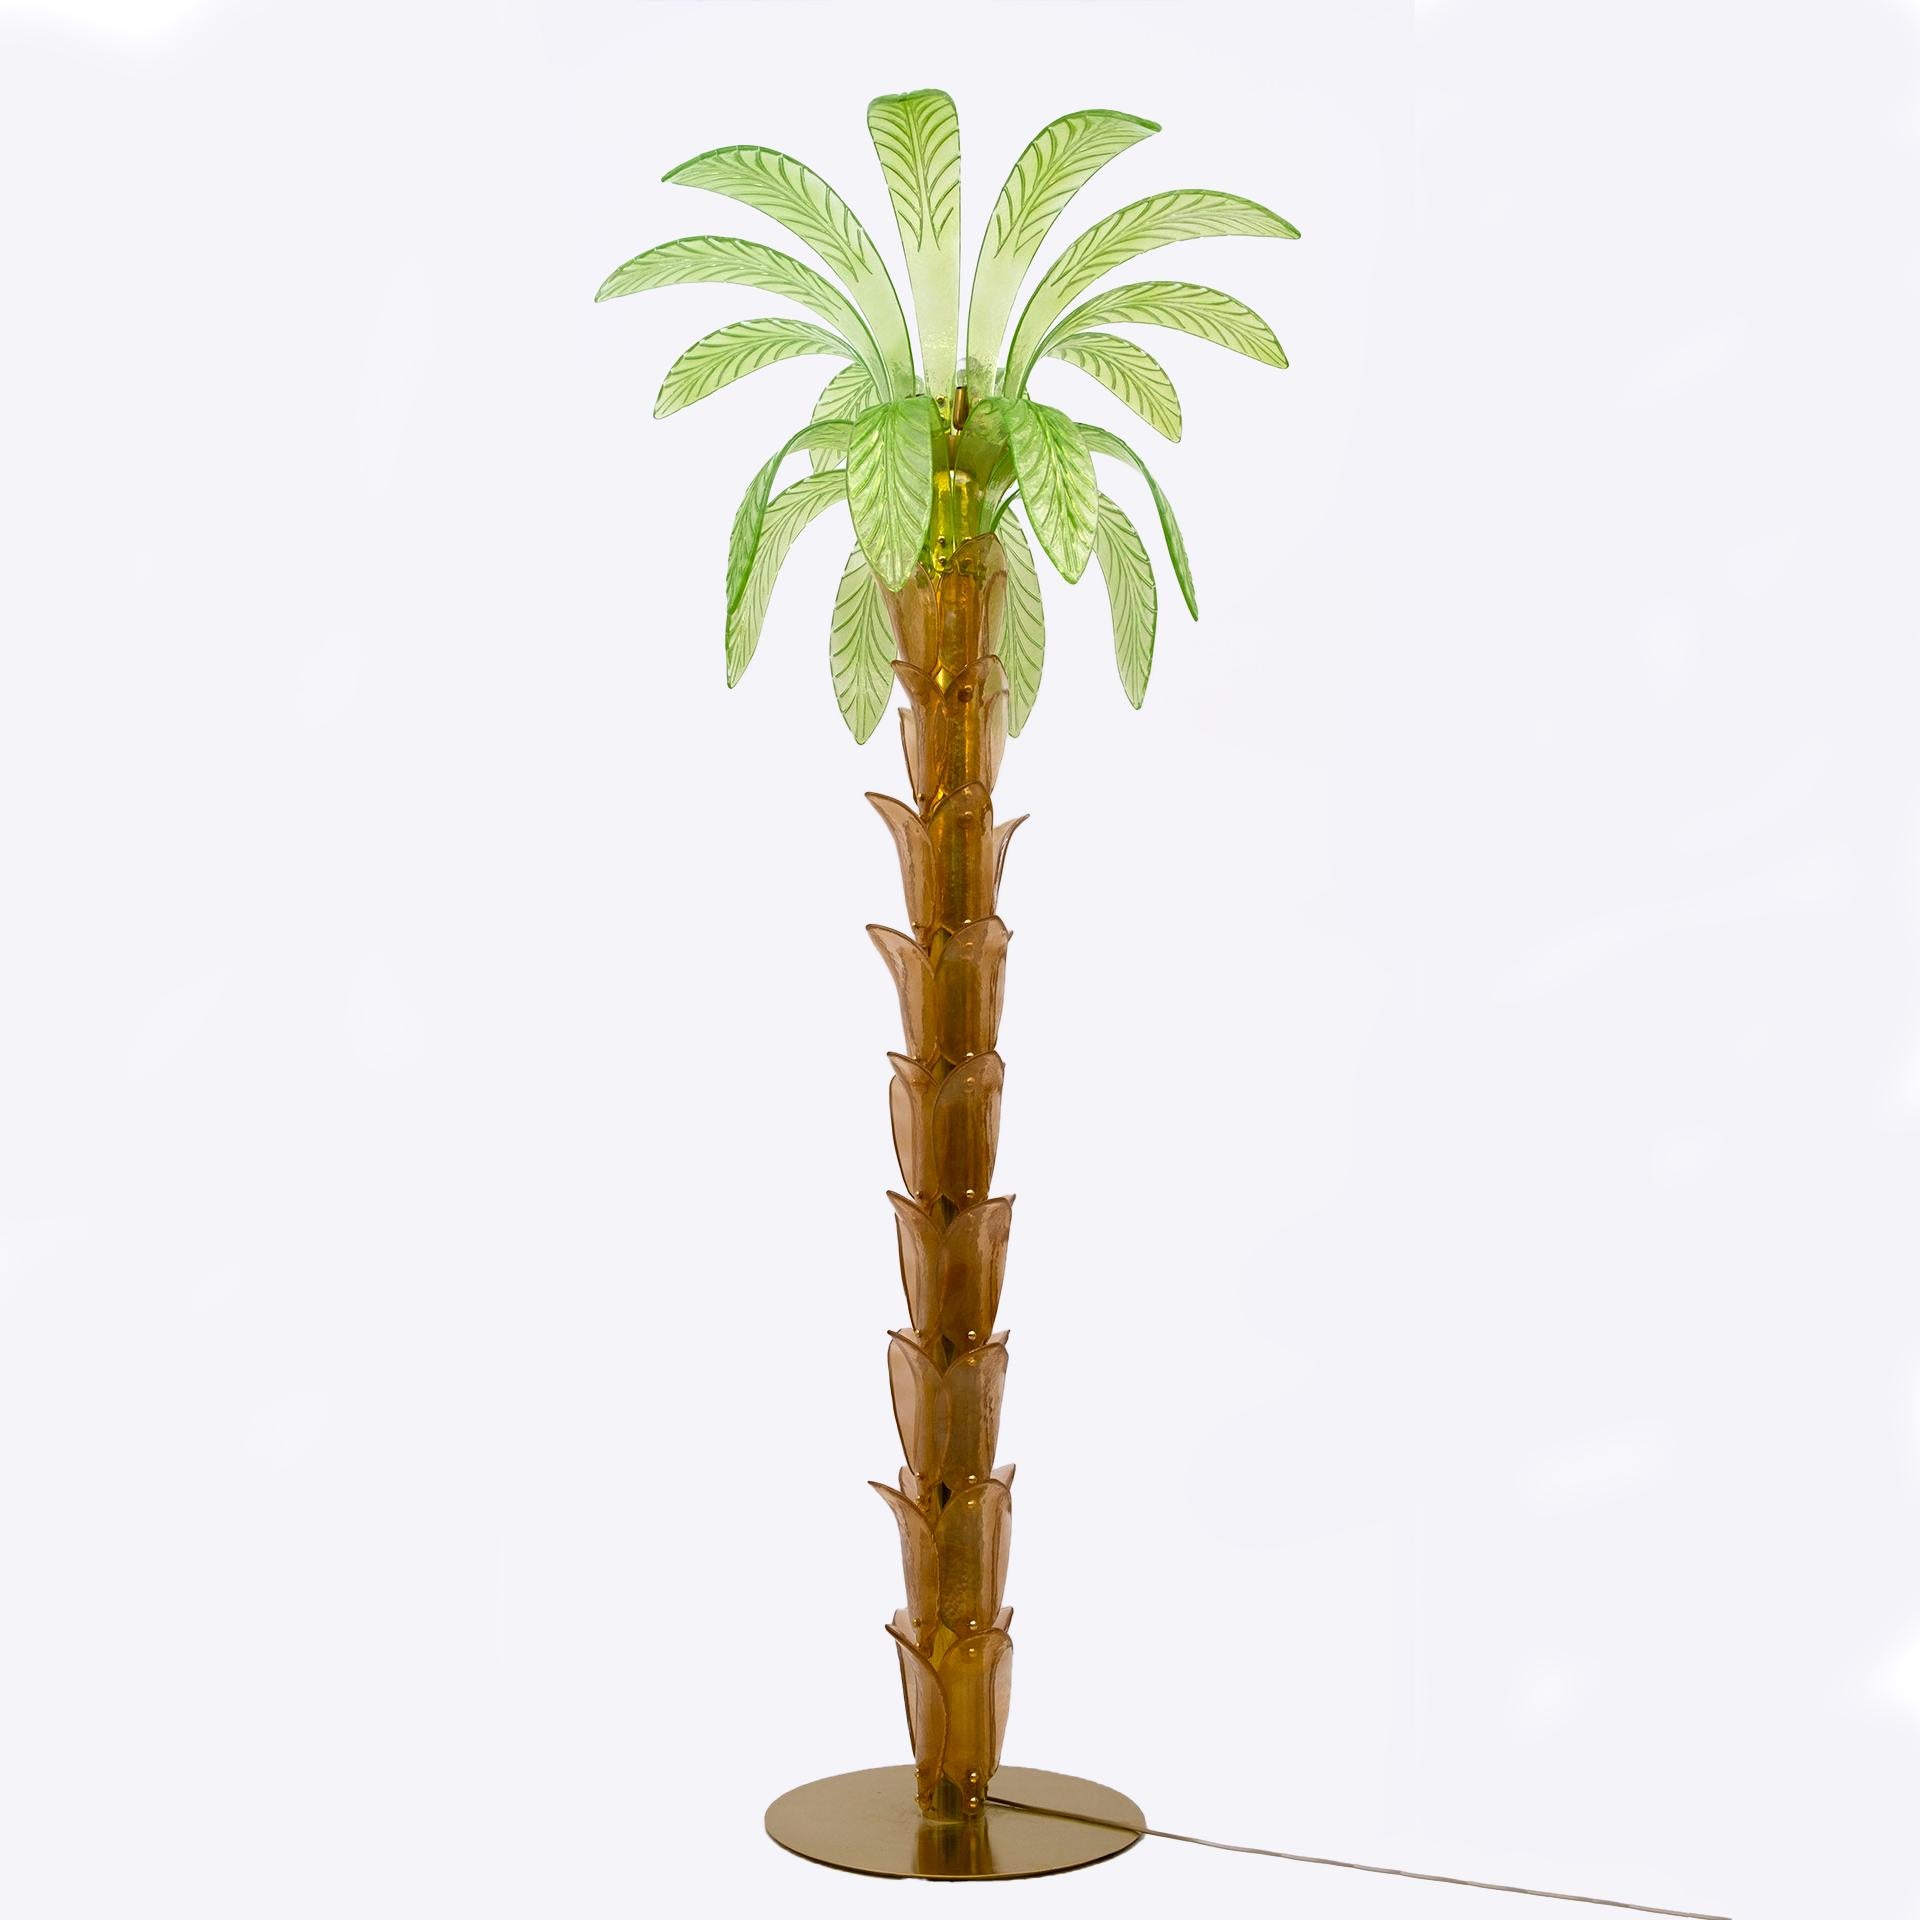 Floor lamp in amber and green Murano blown glass, the structure is in brass, four bulbs.
The floor lamp is also a sculpture that reproduces the trunk and leaves of a palm tree with pieces of glass.